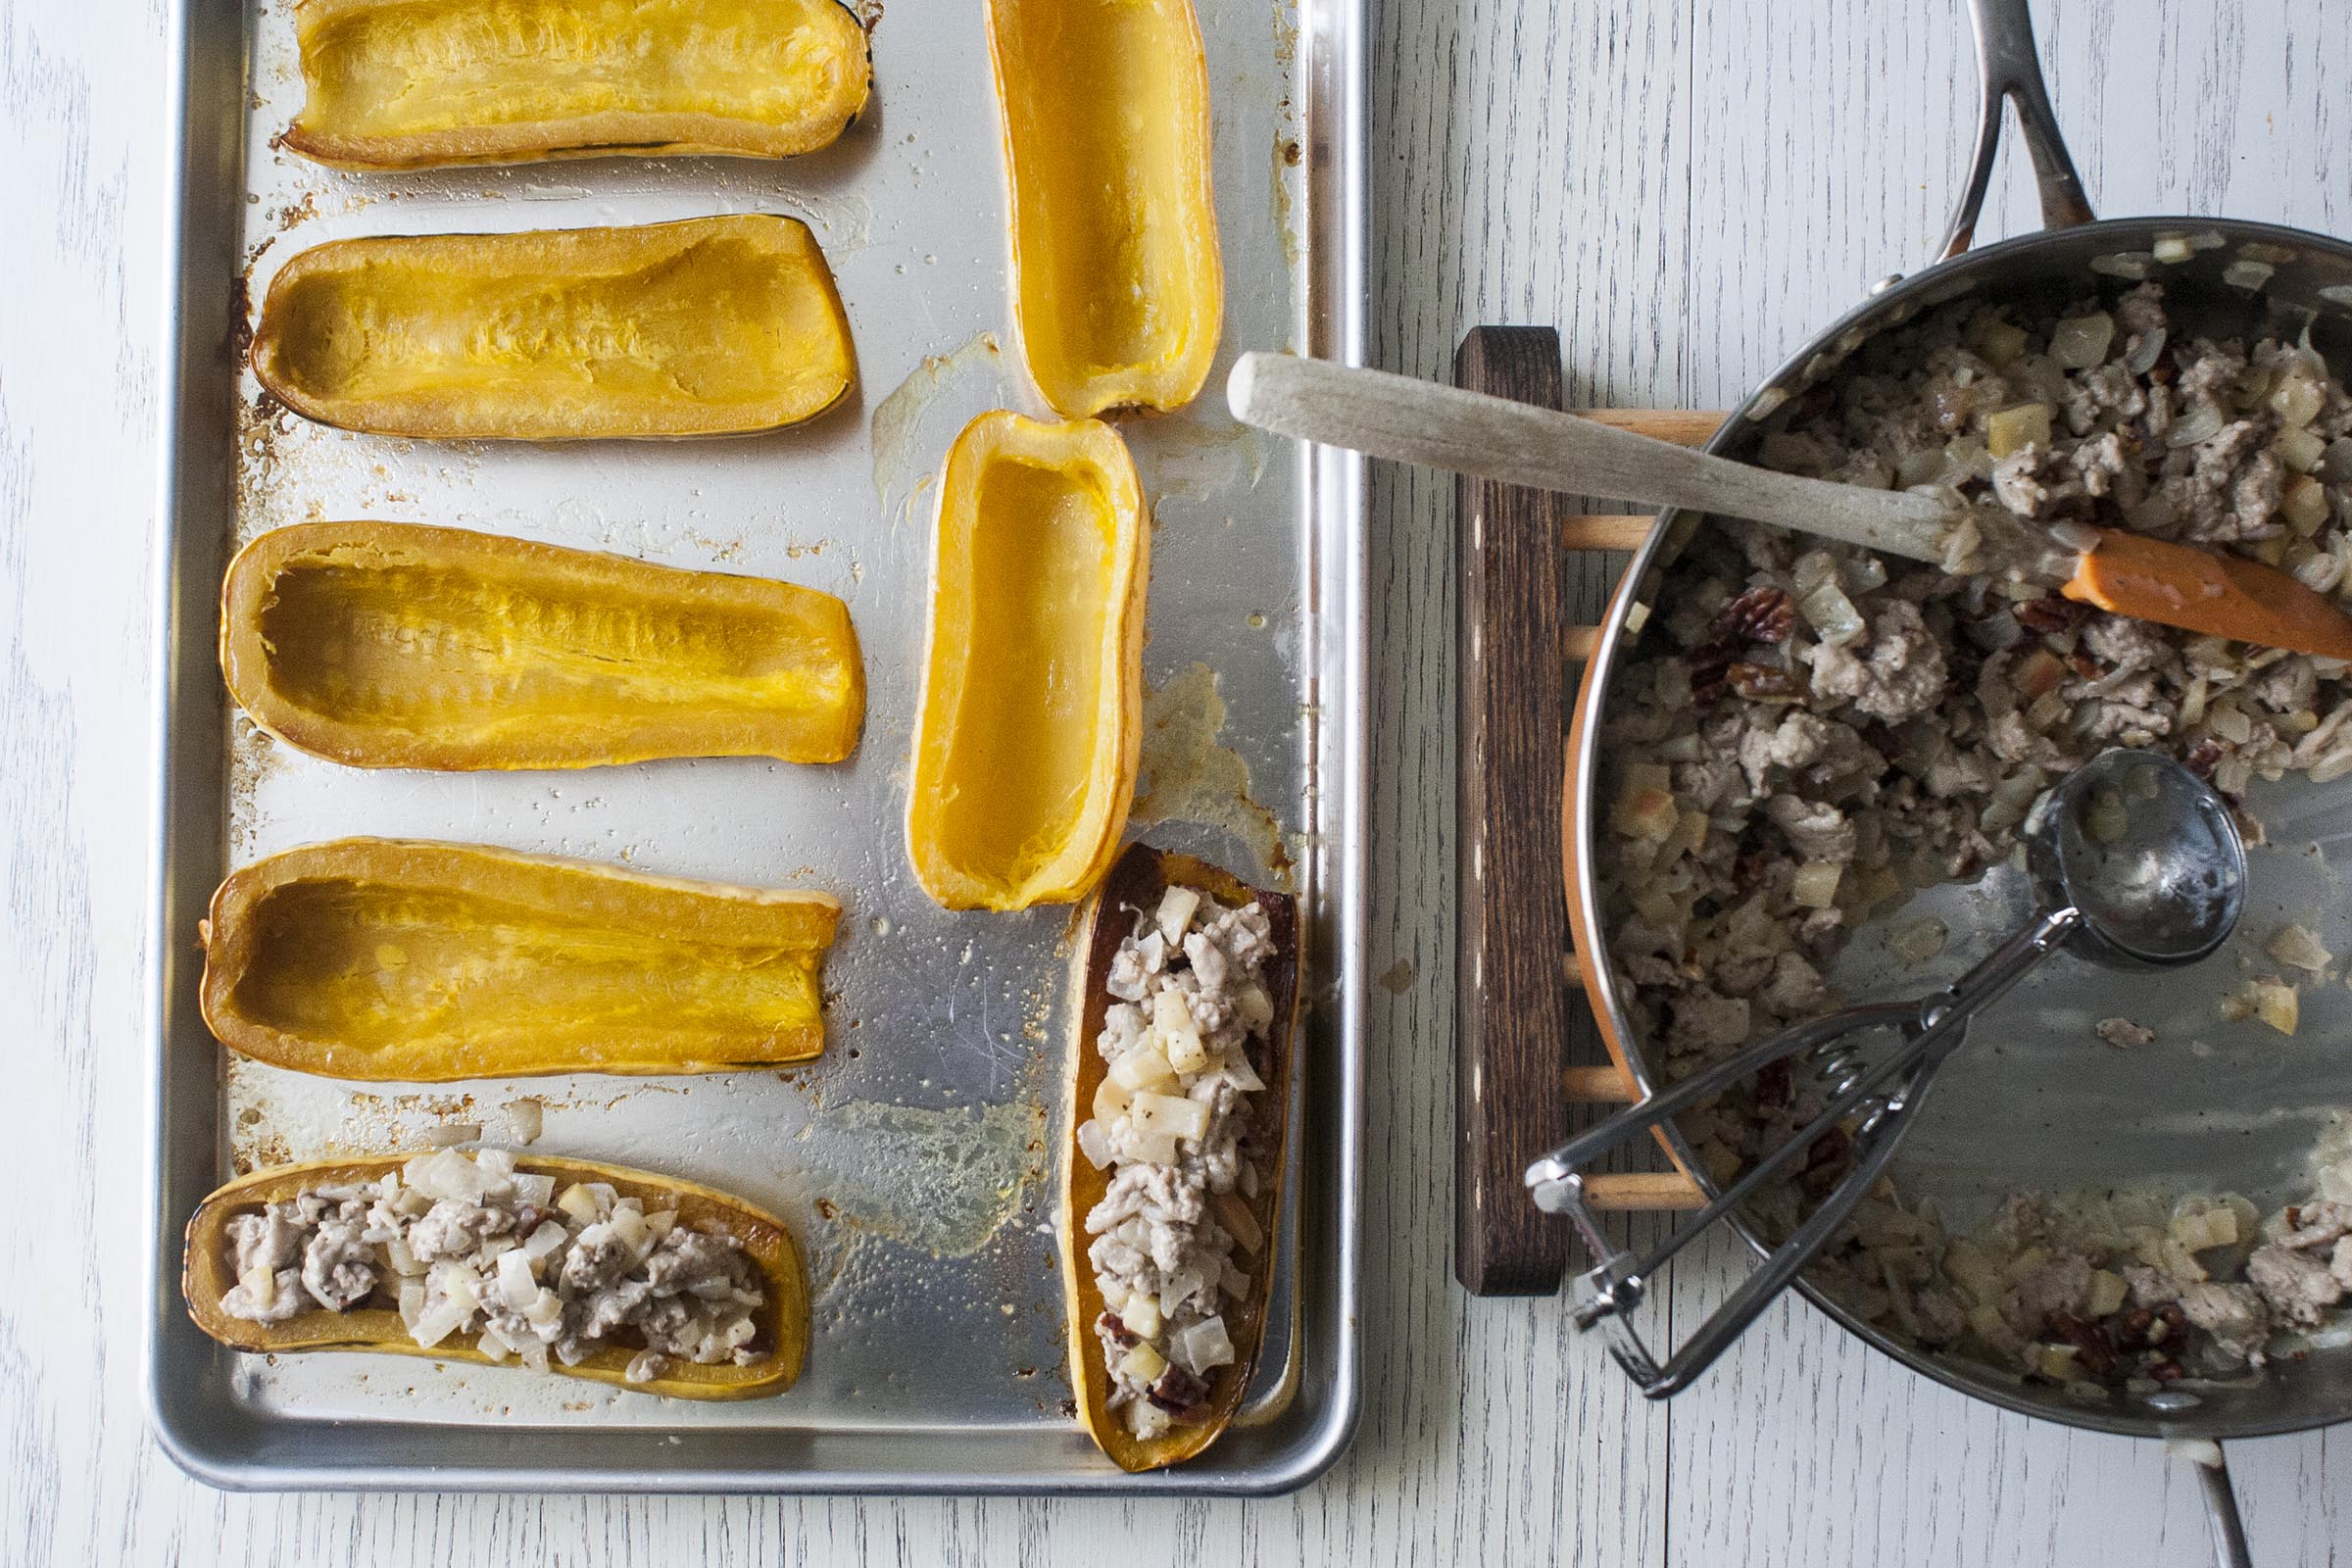 These delicata squash have been roasted and are being stuffed. 